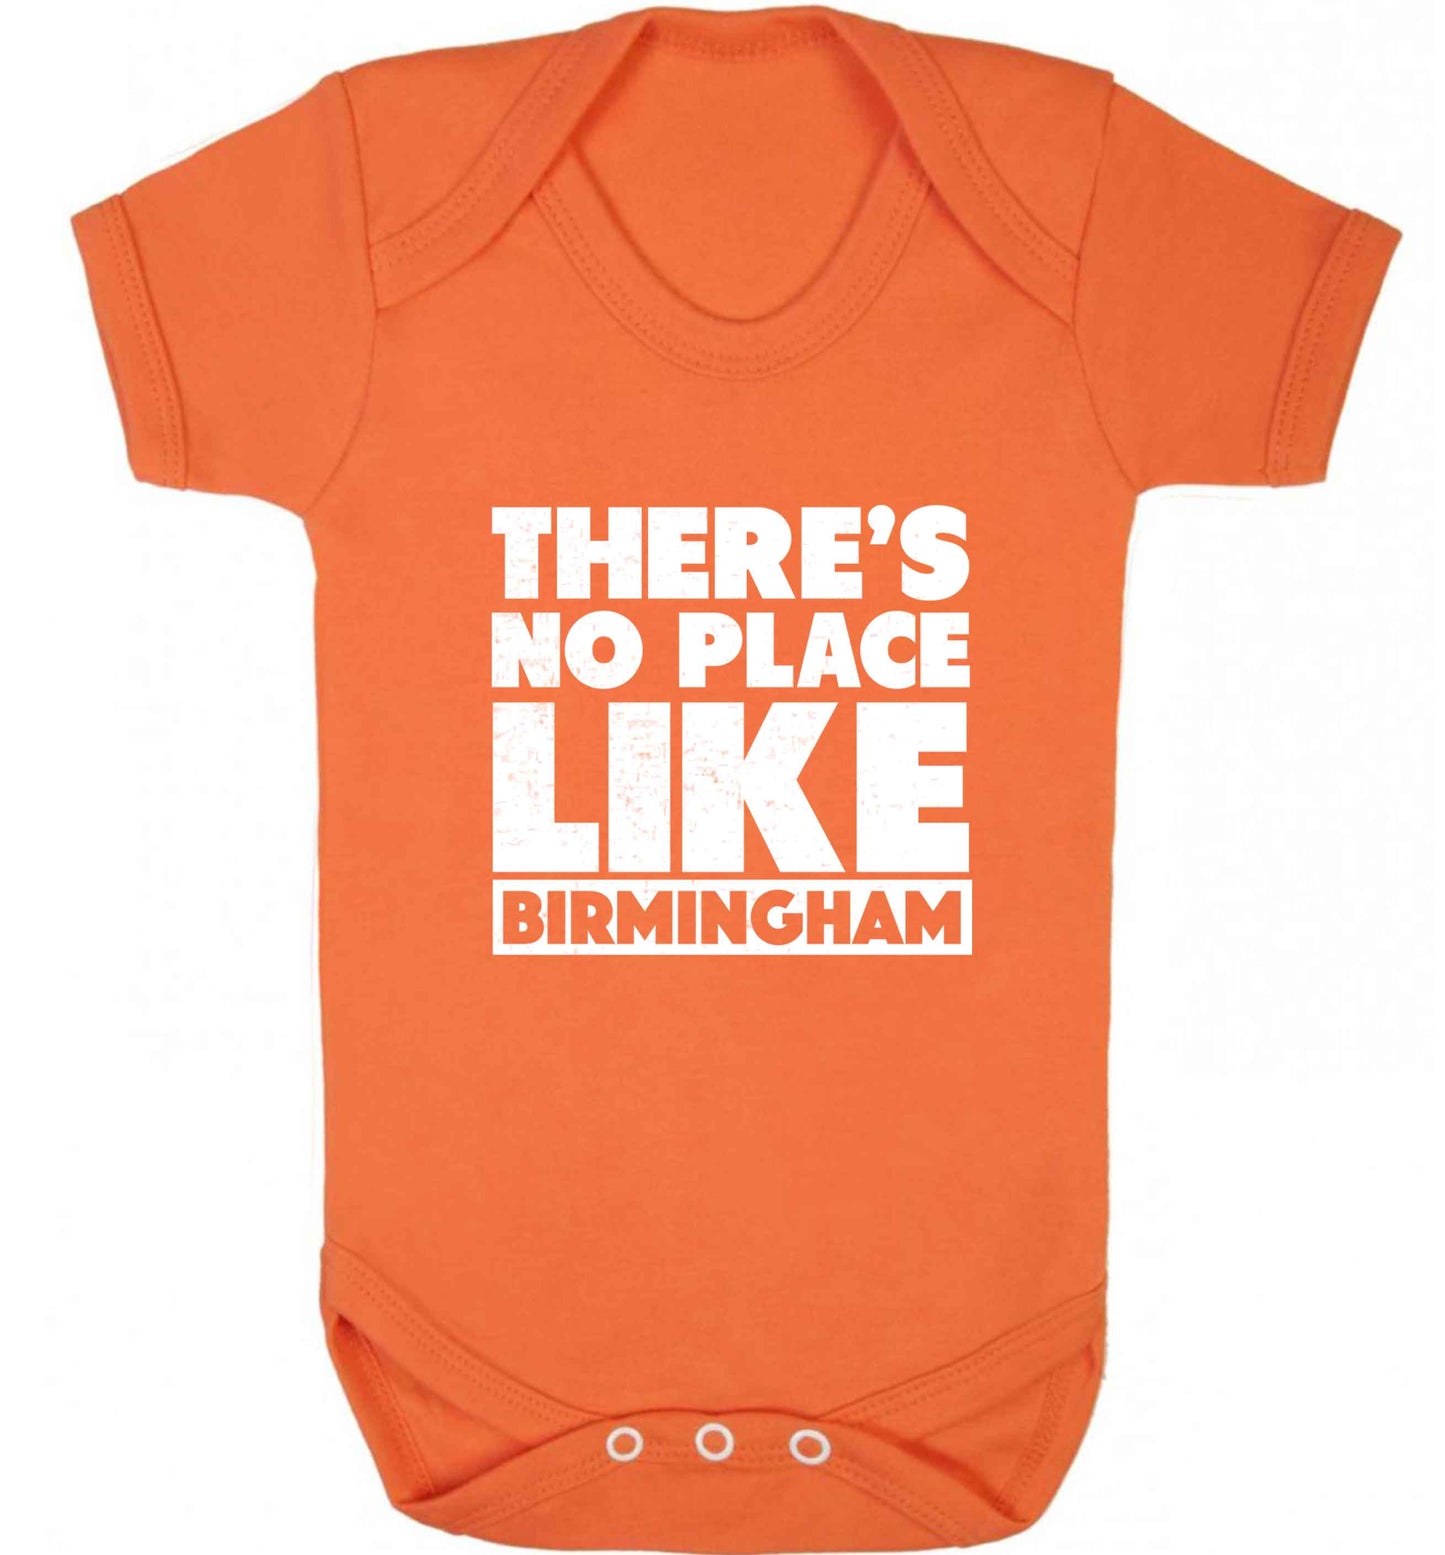 There's no place like Birmingham baby vest orange 18-24 months